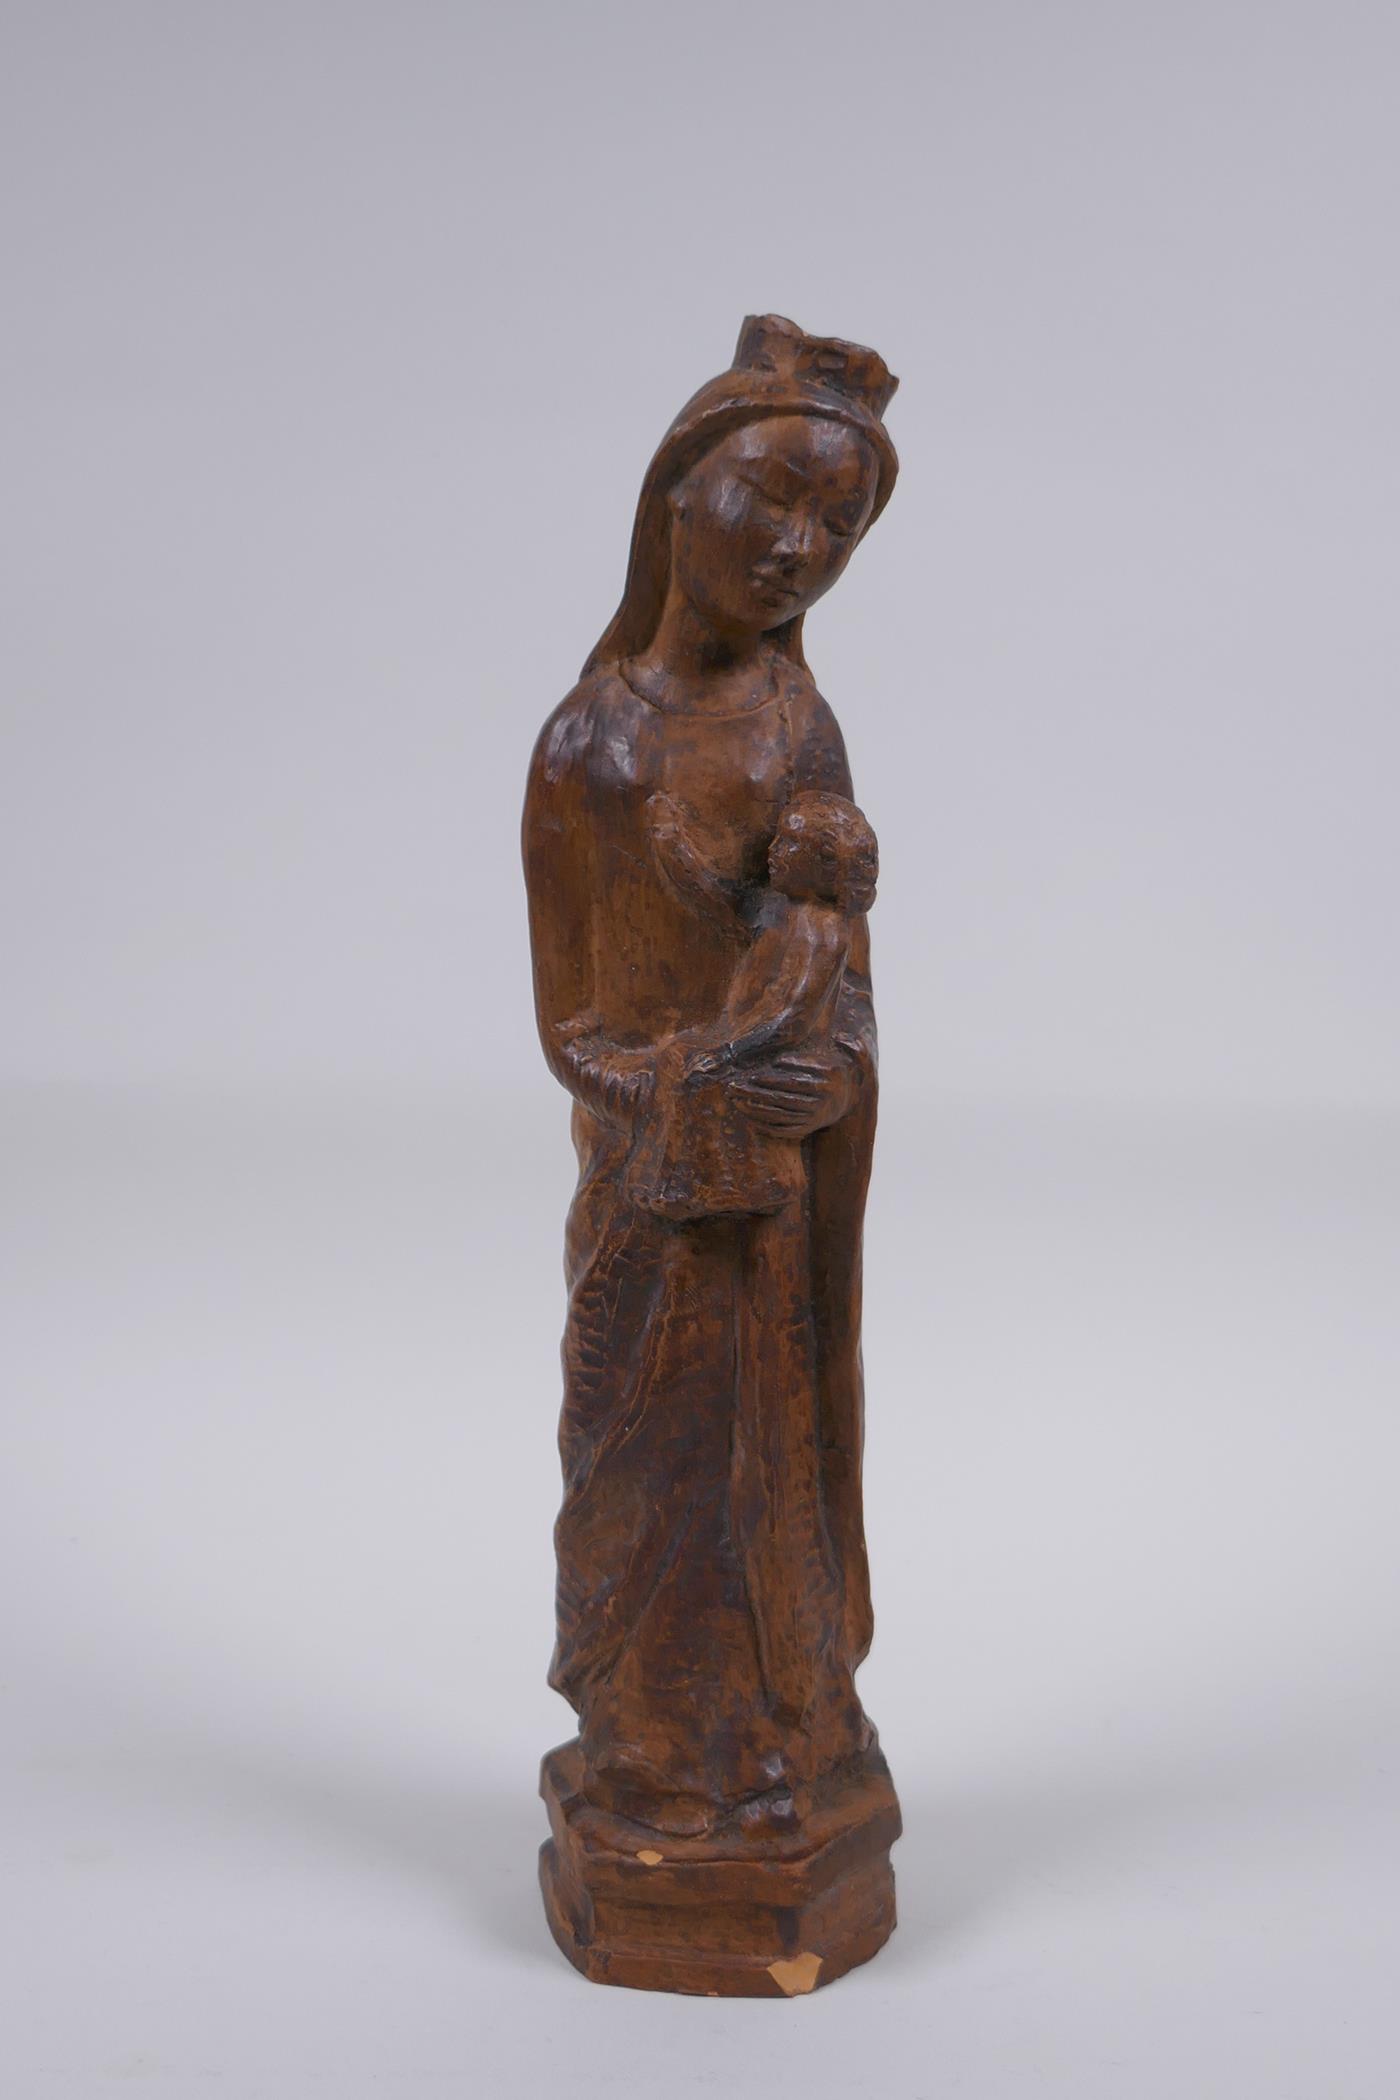 A terracotta figure of Mary and Jesus, 27cm high